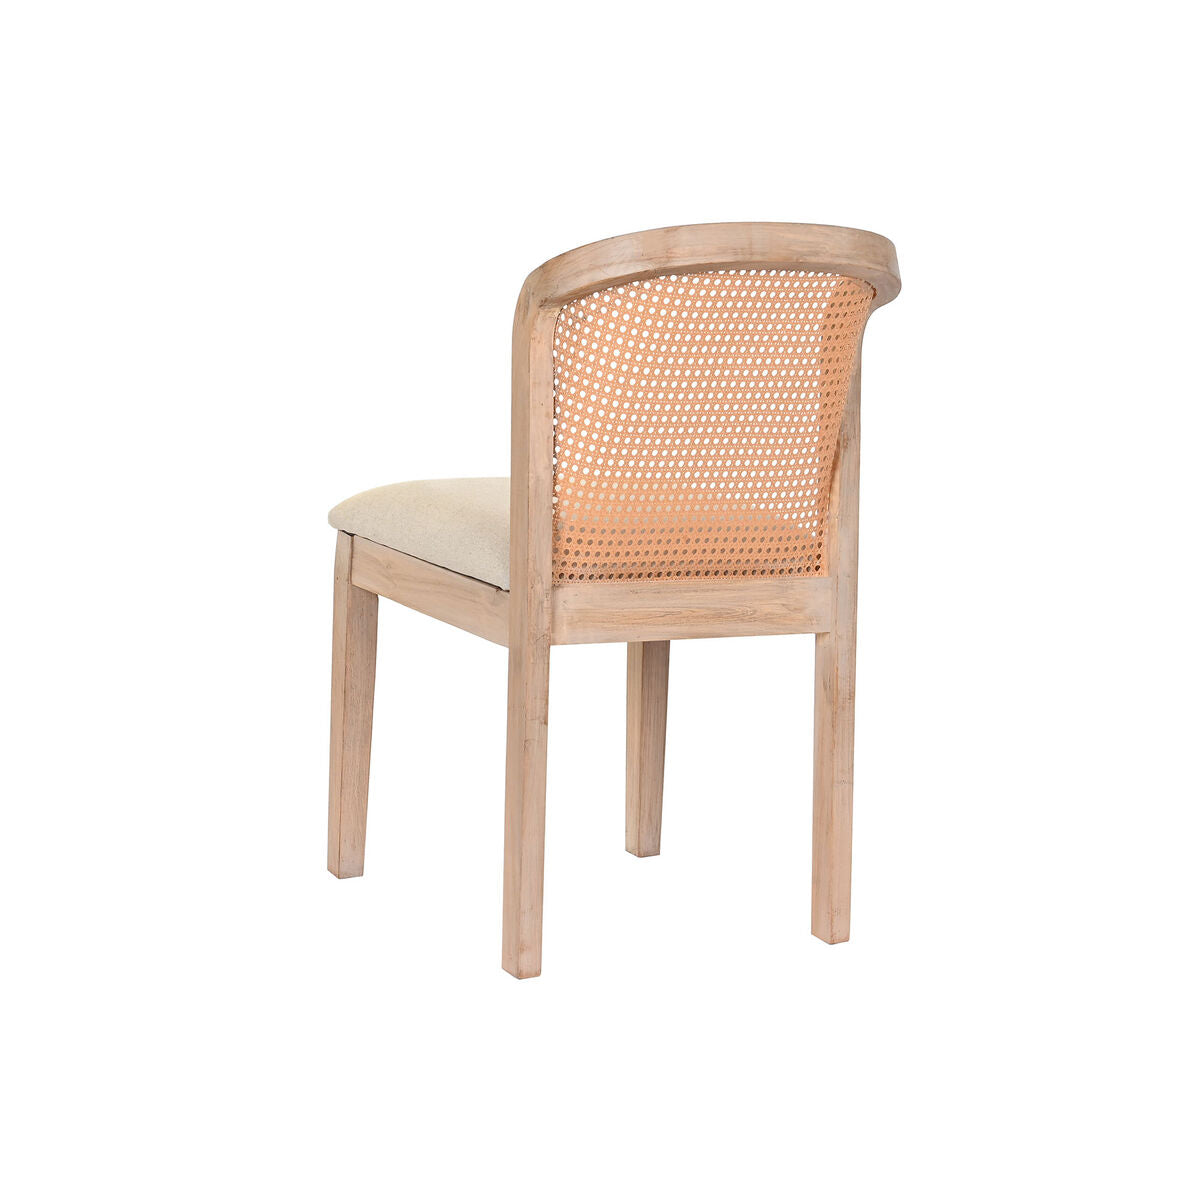 Beige Dining Chair in Wood and Rattan (46 x 61 x 86 cm)